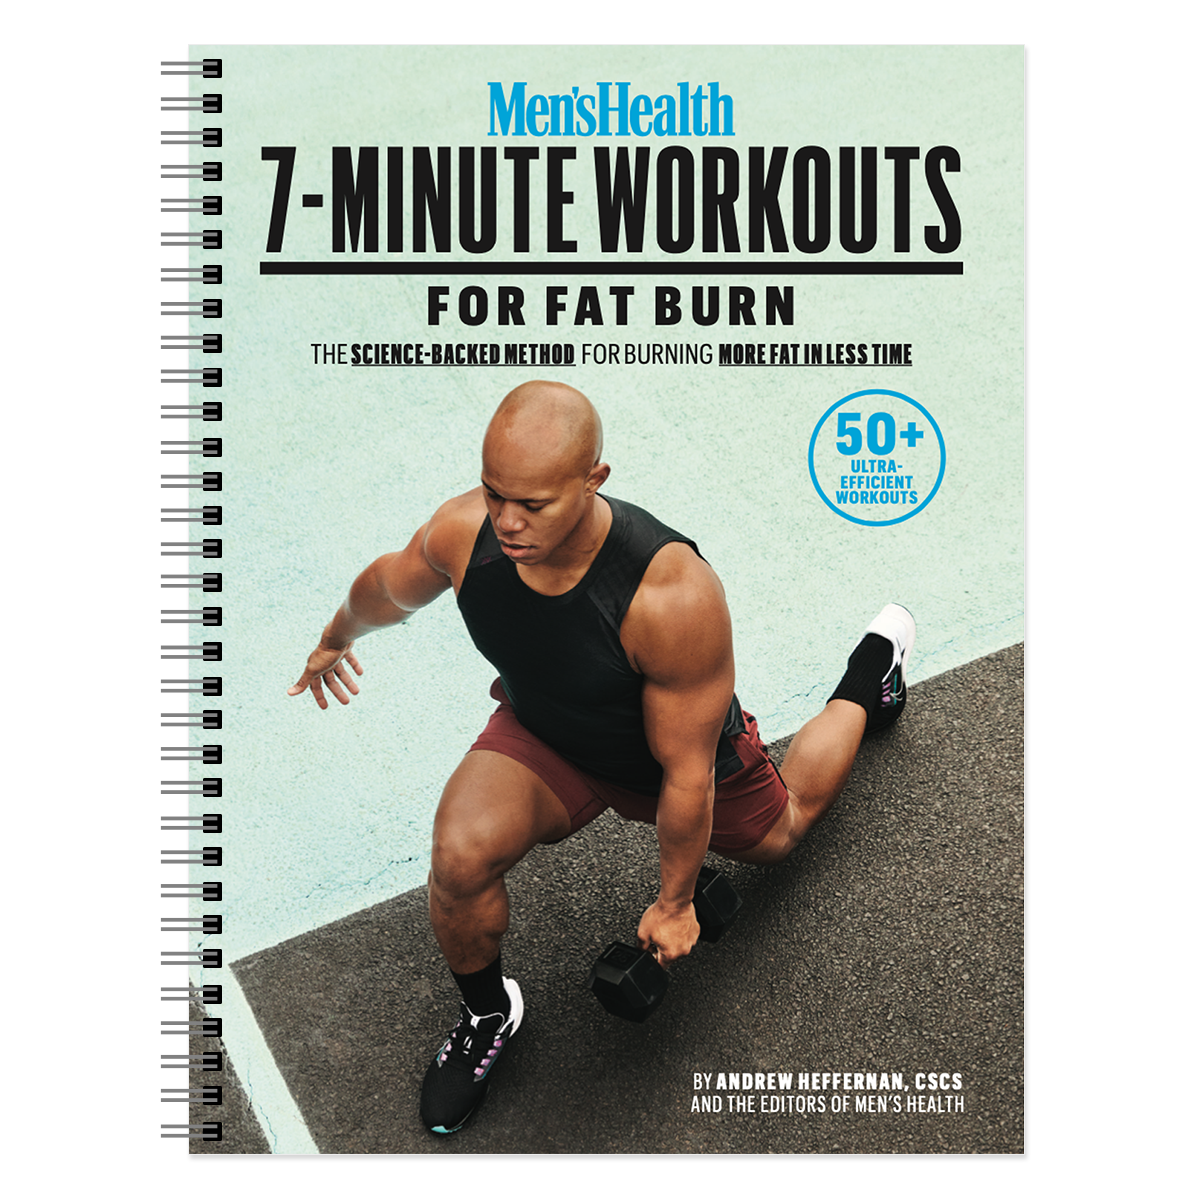 Men's Health 7-Minute Workouts for Fat Burn